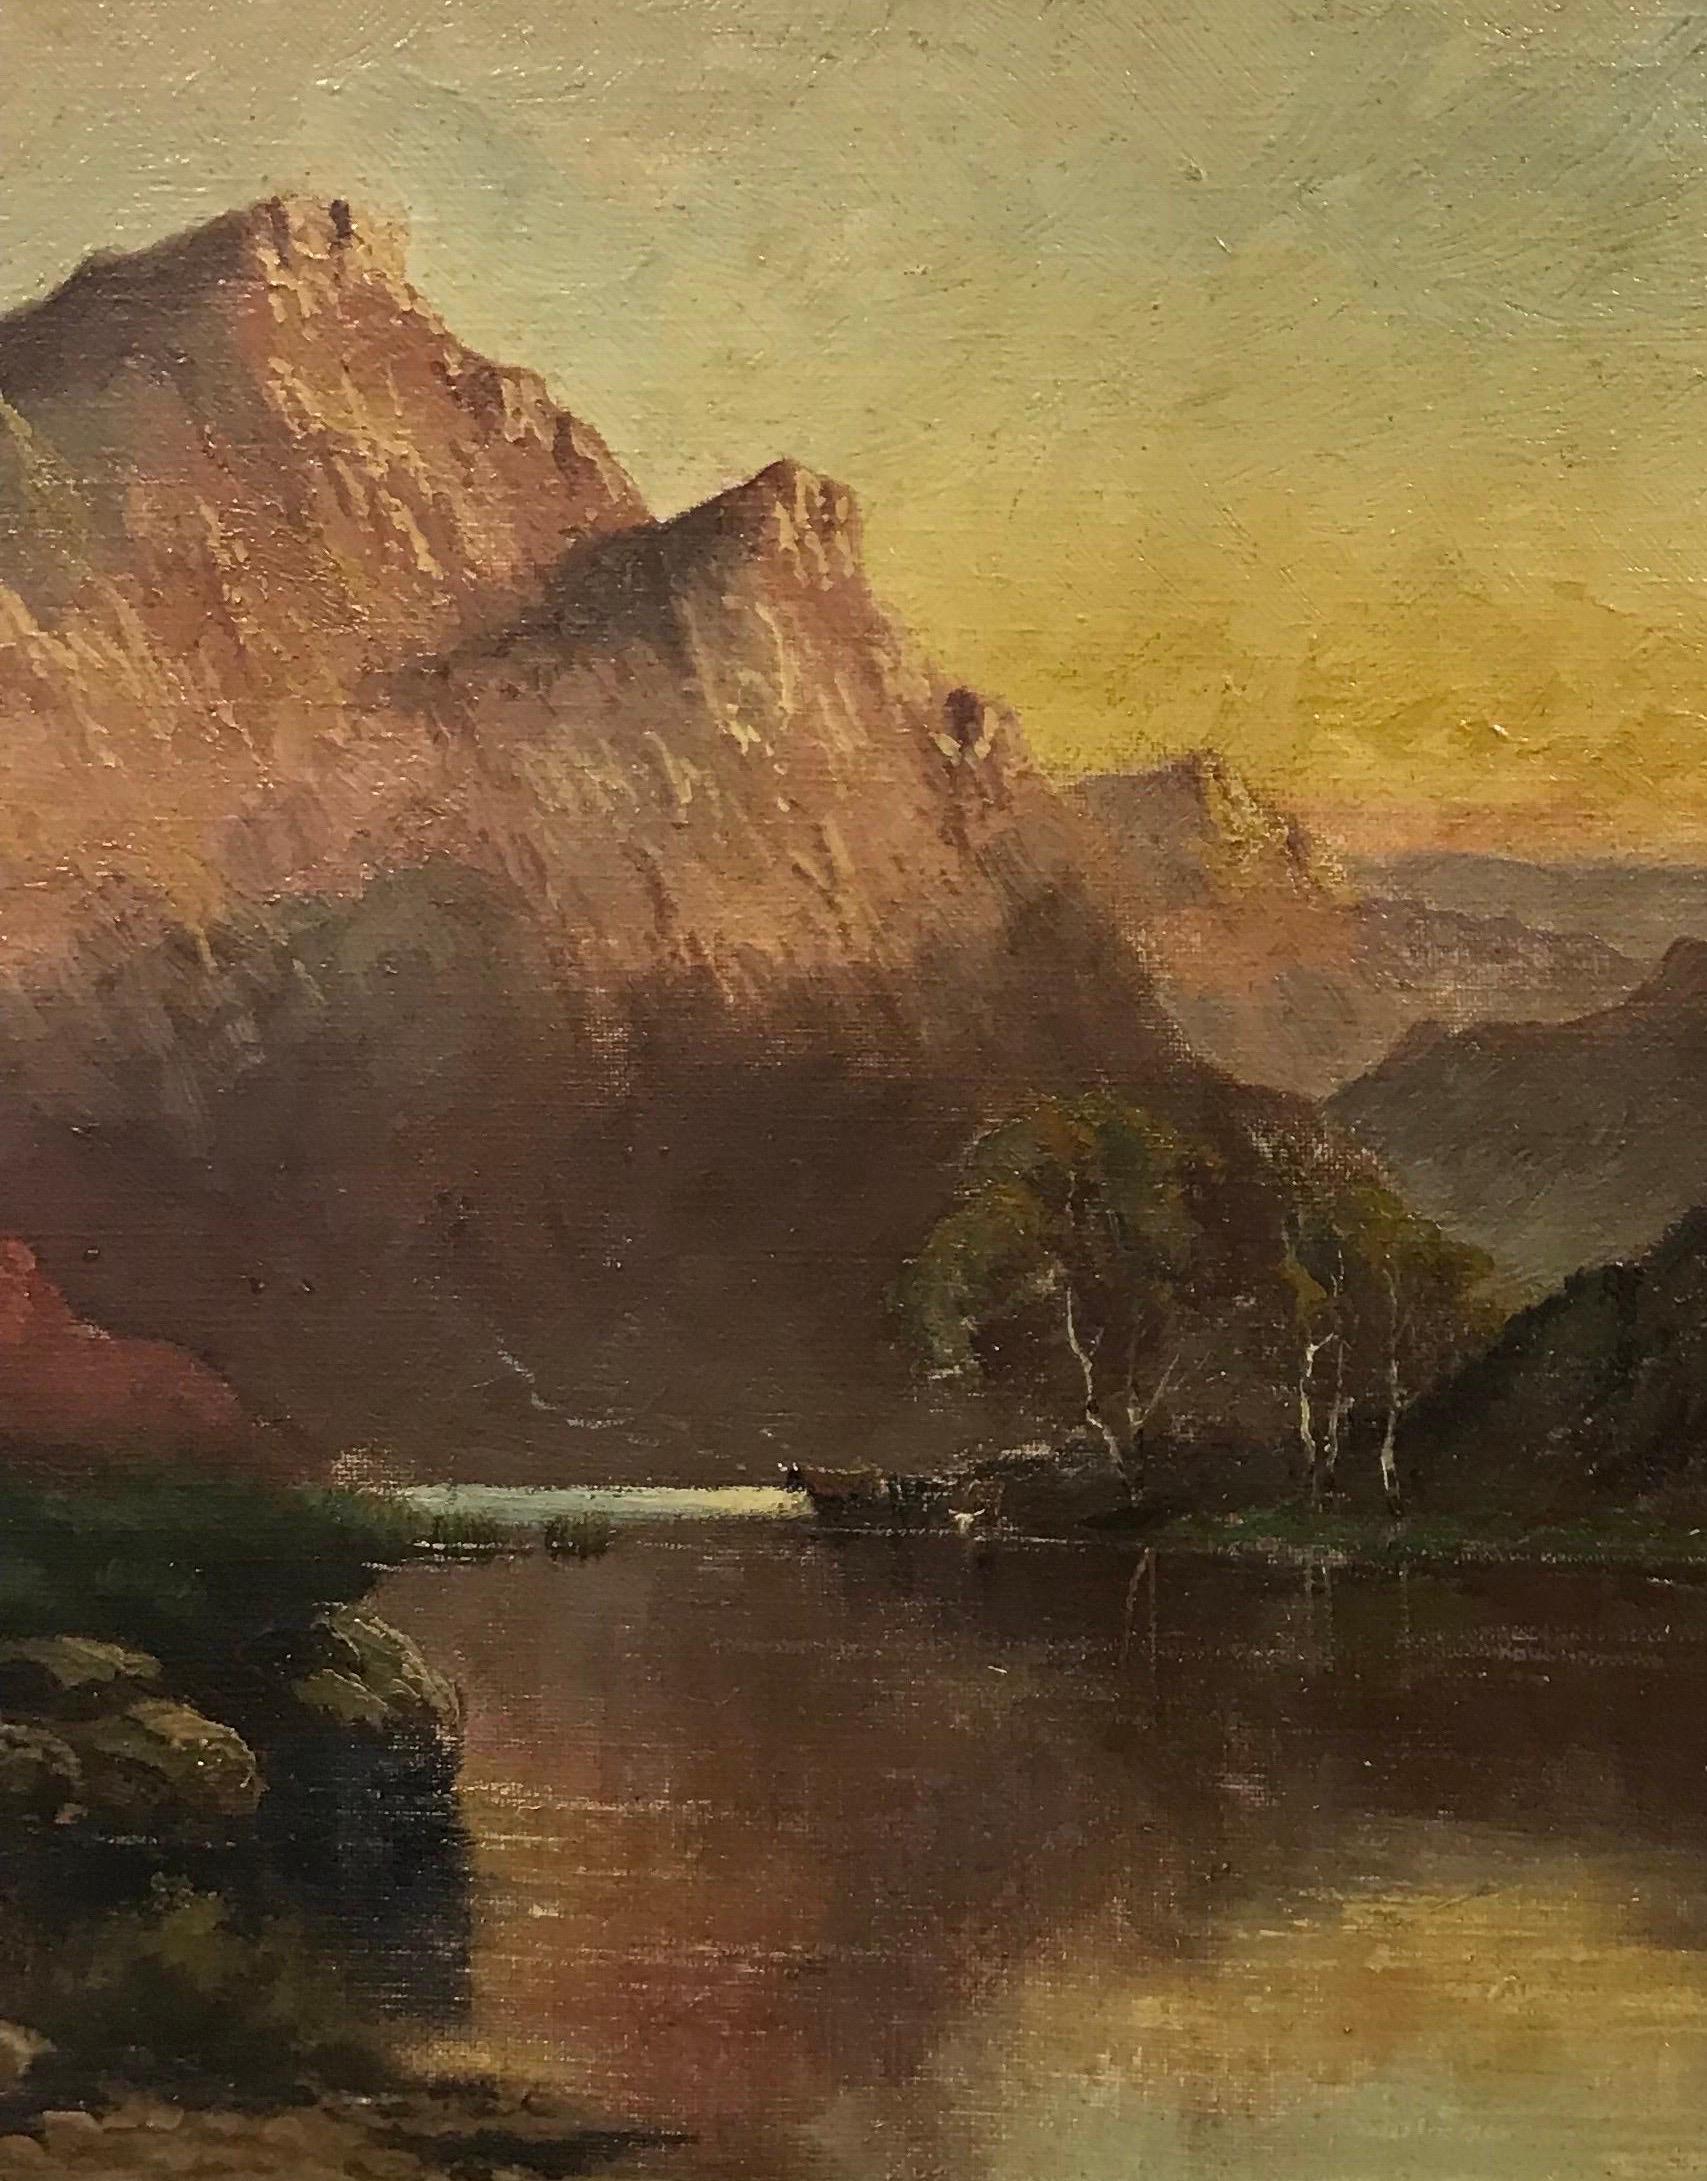 Artist/ School: Jack Maurice Ducker (British, 19th/ 20th century), signed and dated 1919

Title: Sunset over the Scottish Highlands

Medium: oil on canvas, framed

Framed: 22 x 30 inches
Canvas: 16 x 24 inches

Provenance: private collection,